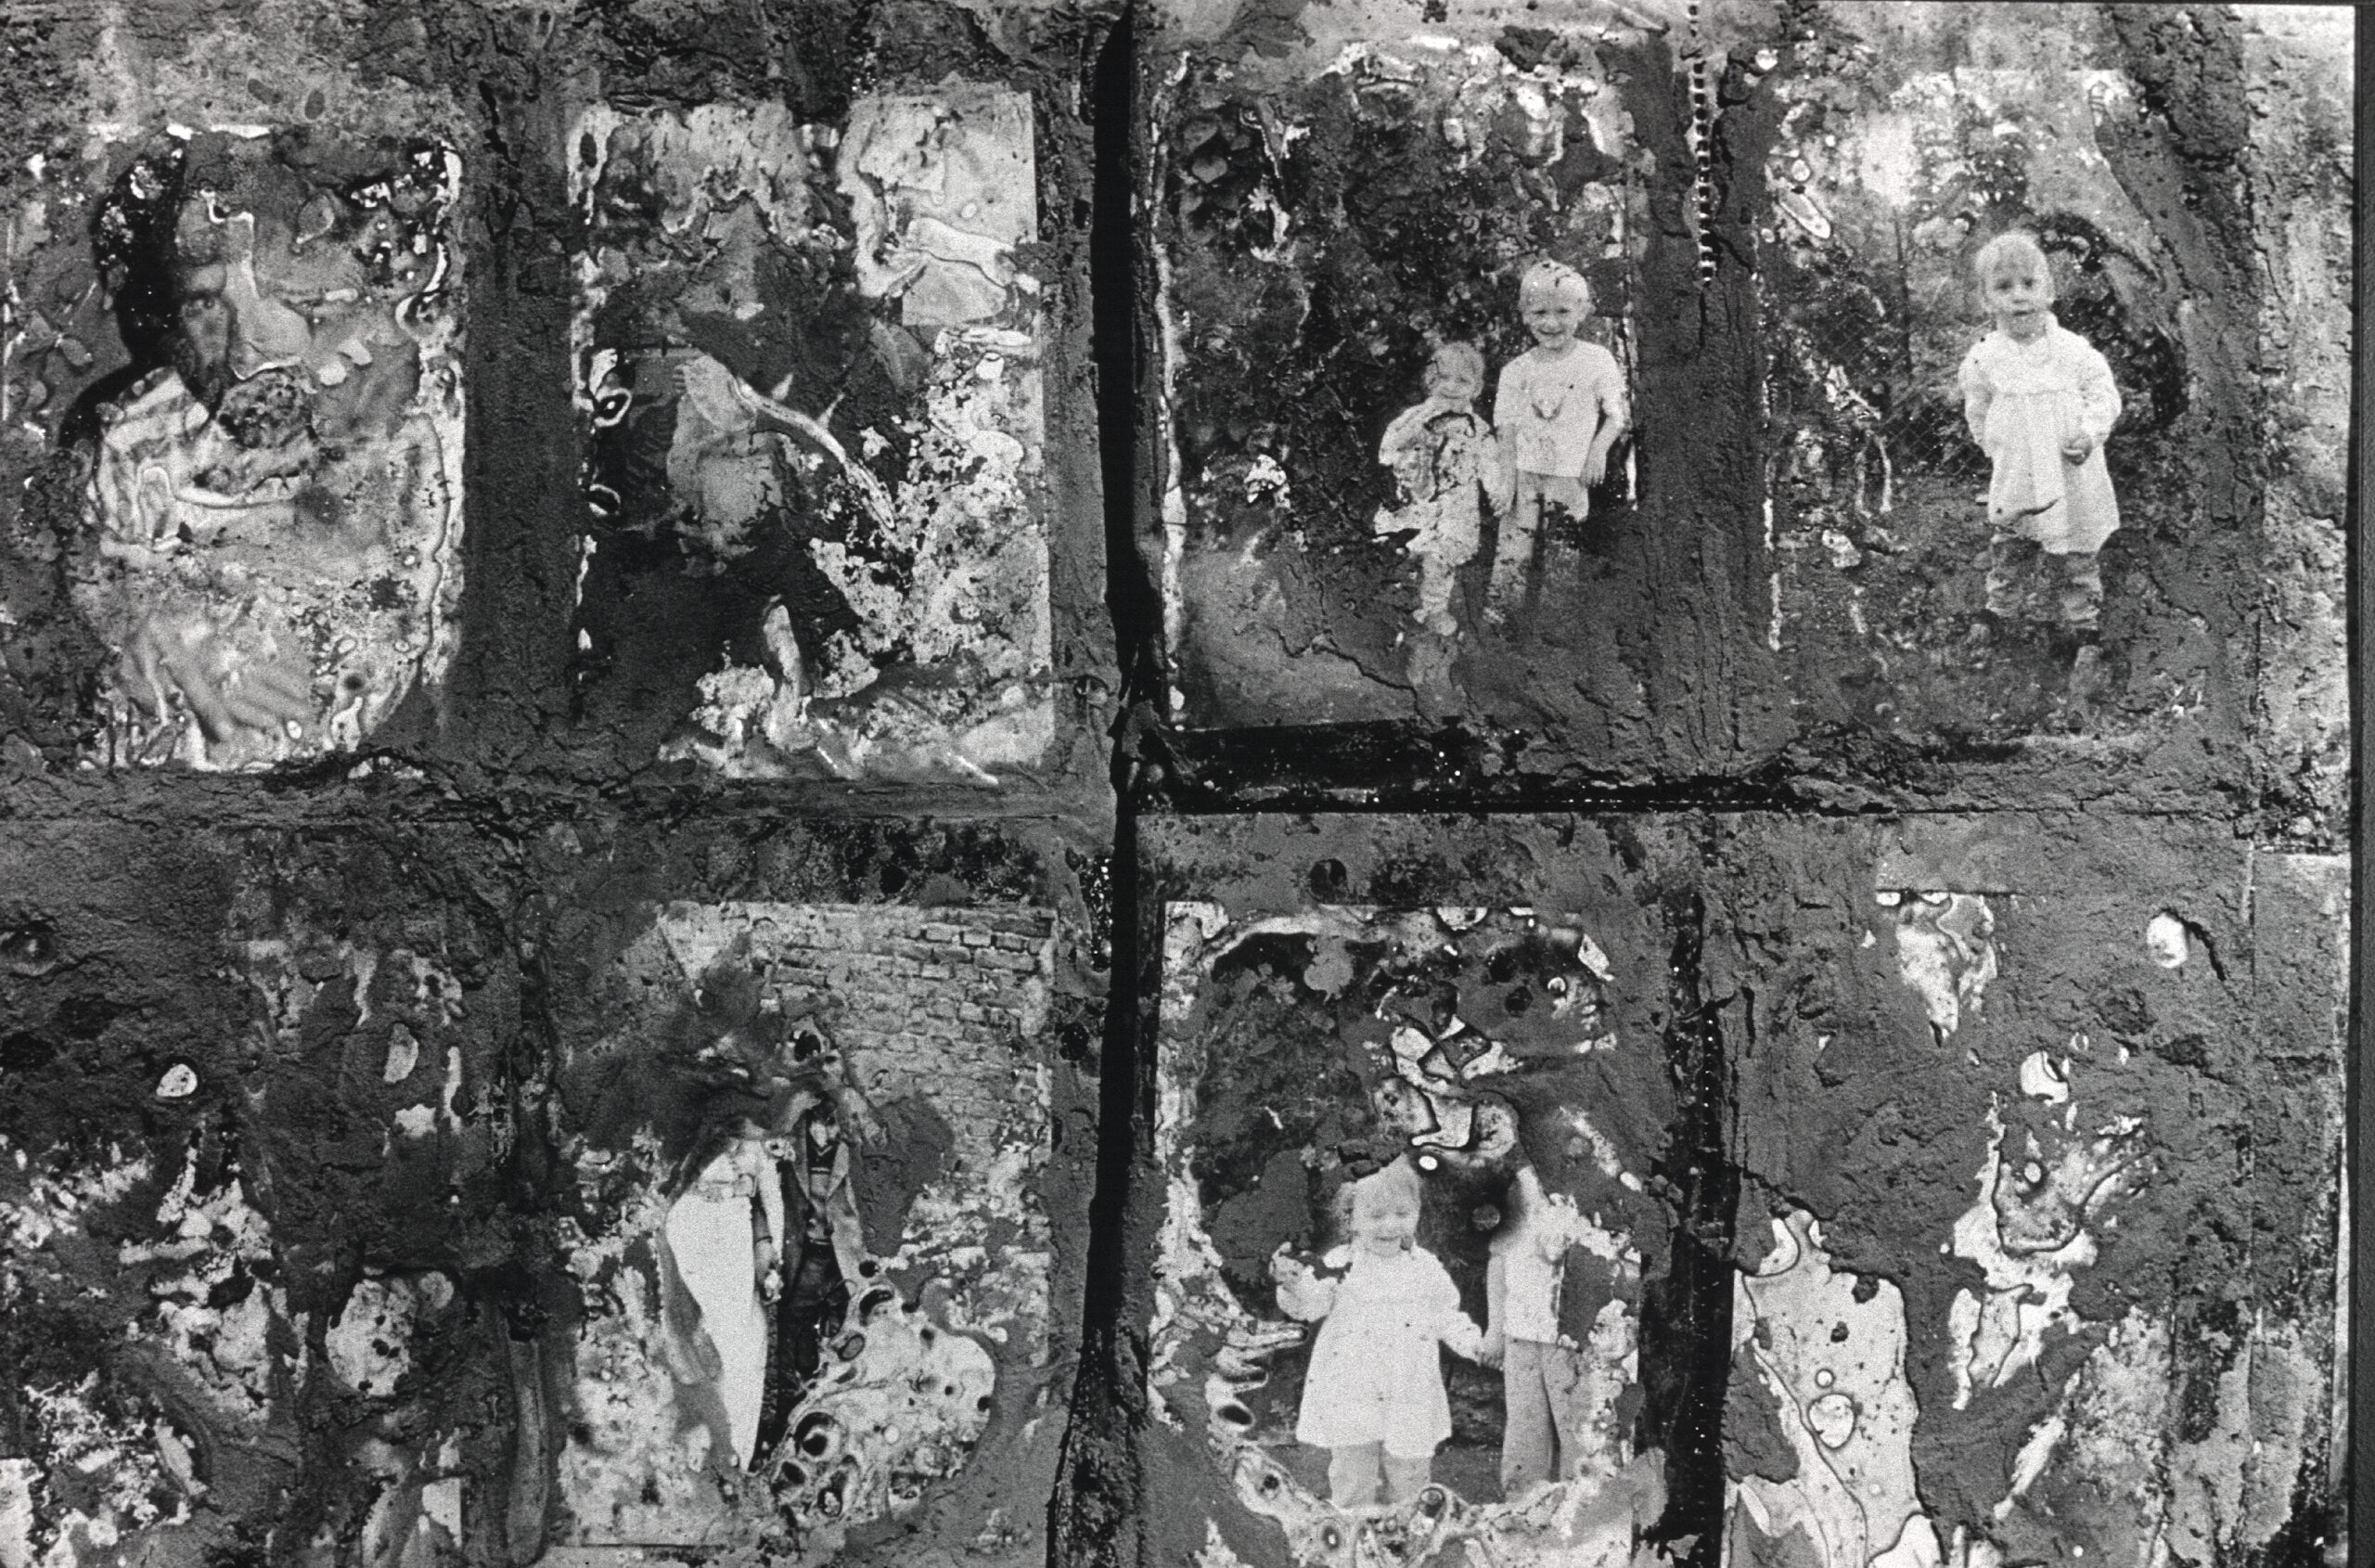 A collection of photographs burned at the edges.